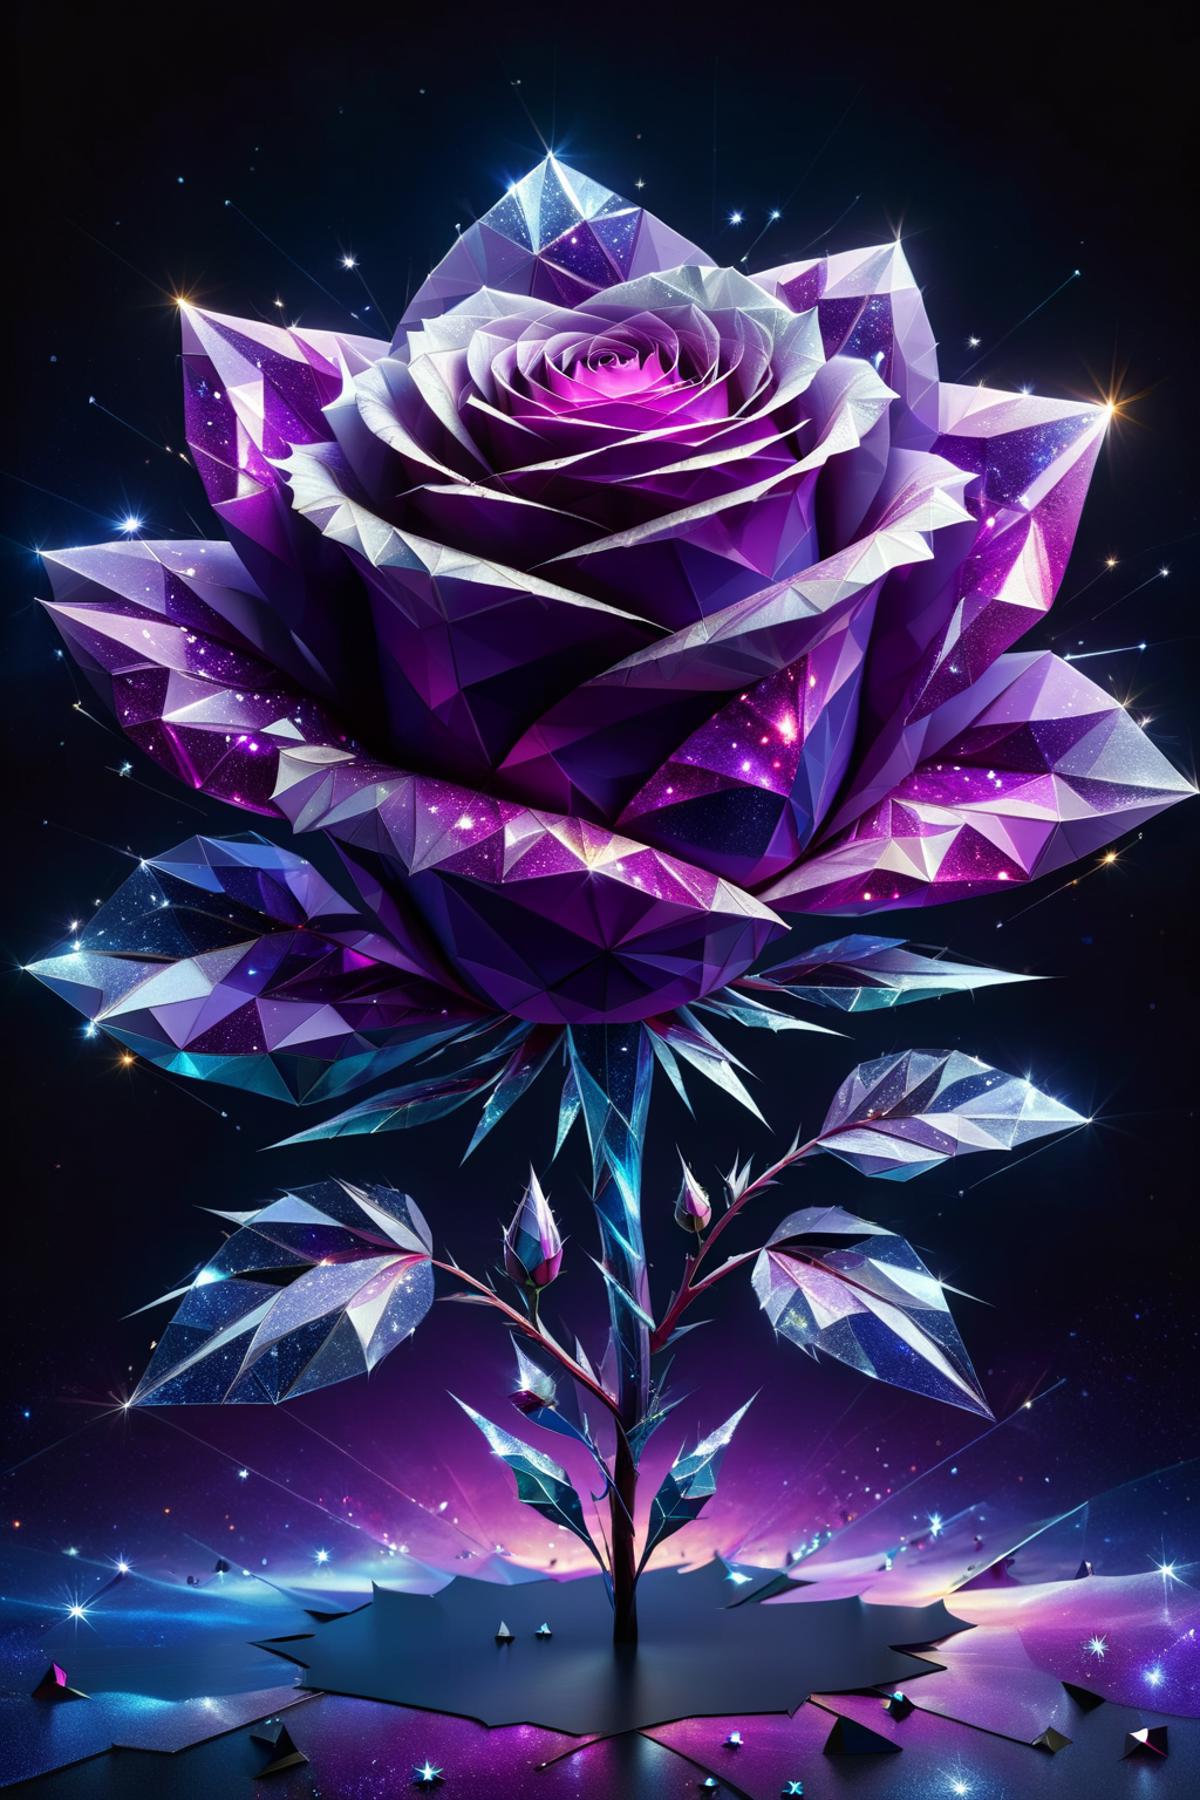 Colorful 3D Rose with Crystal Petals and Leaves, Purple and Blue Background